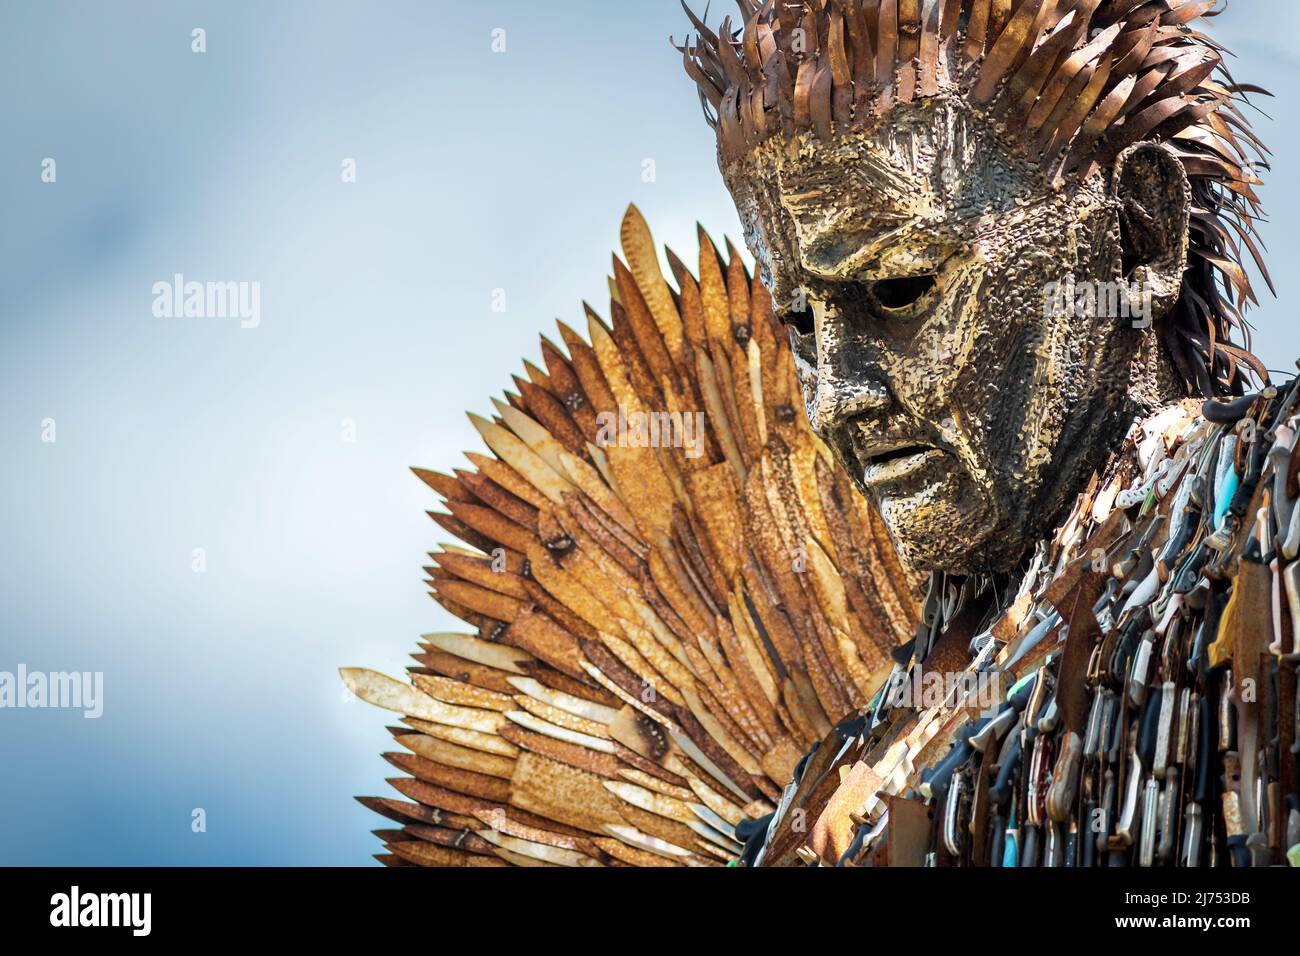 Northampton, UK - May 5, 2022: Knife angel sculpture made from 100,000 blades that were confiscated or handed in across the UK to police, displayed ou Stock Photo